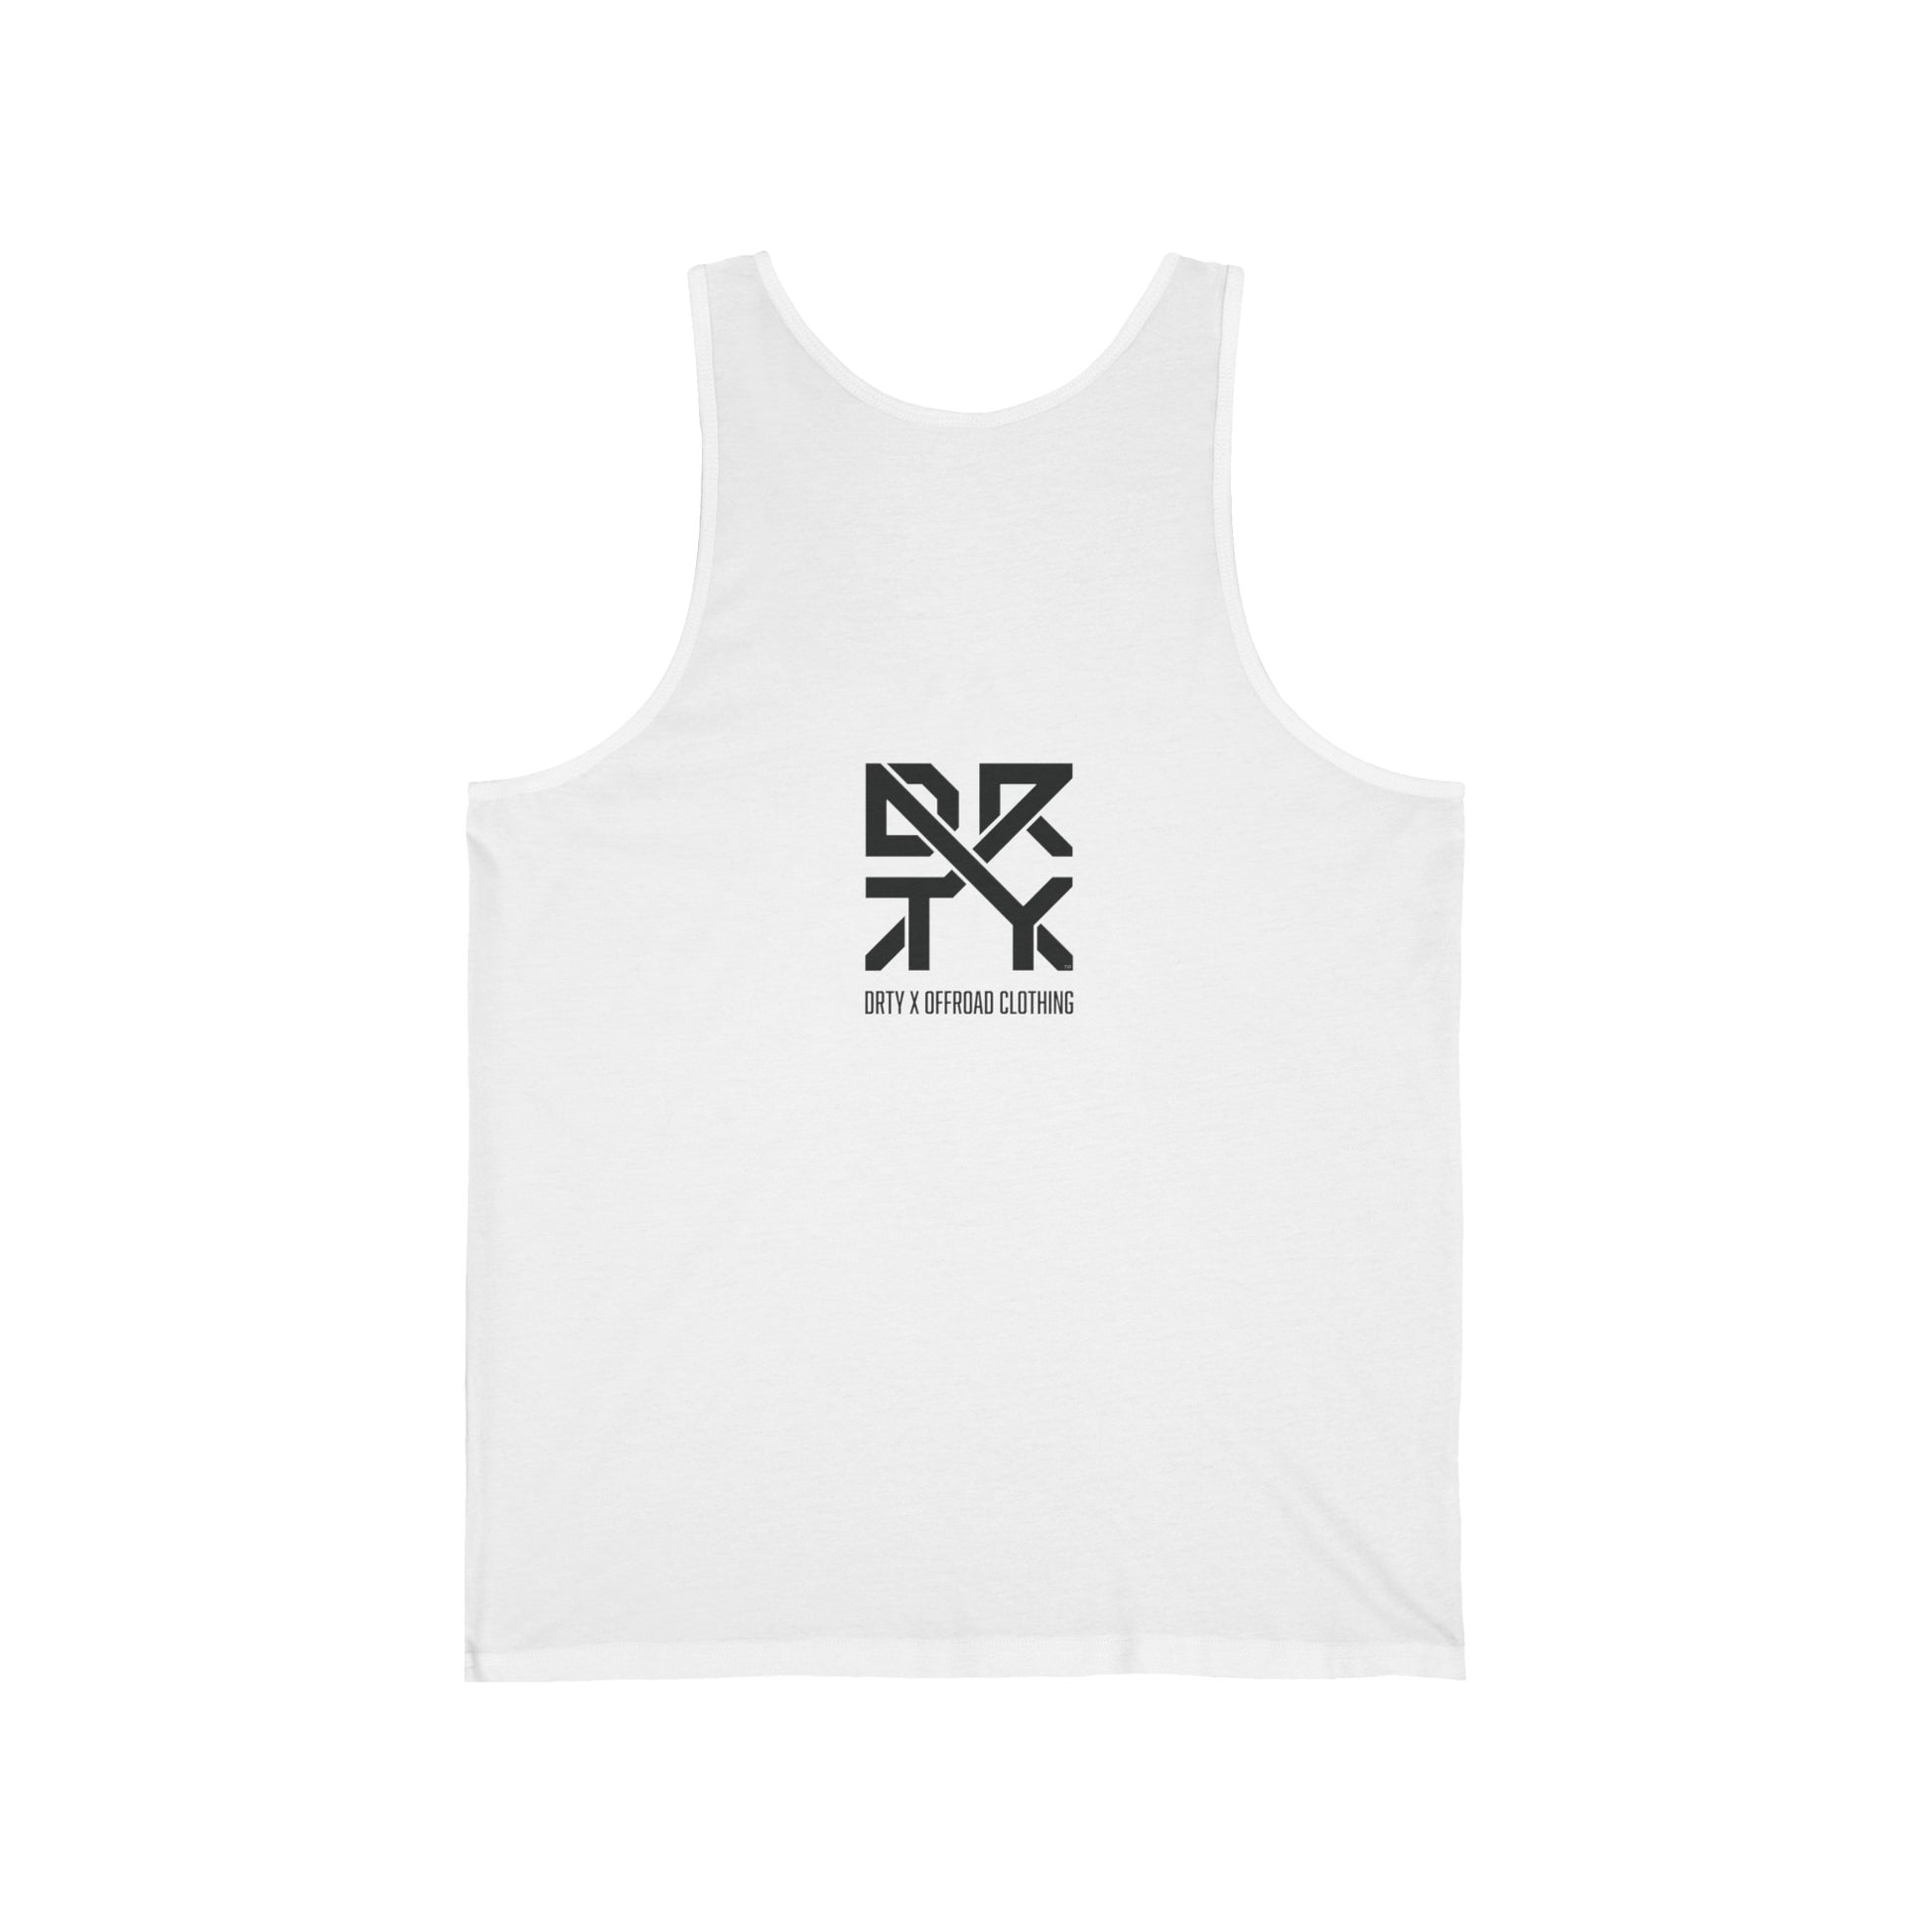 This image showcases a back view of a tank top with a top centered DRTY X logo